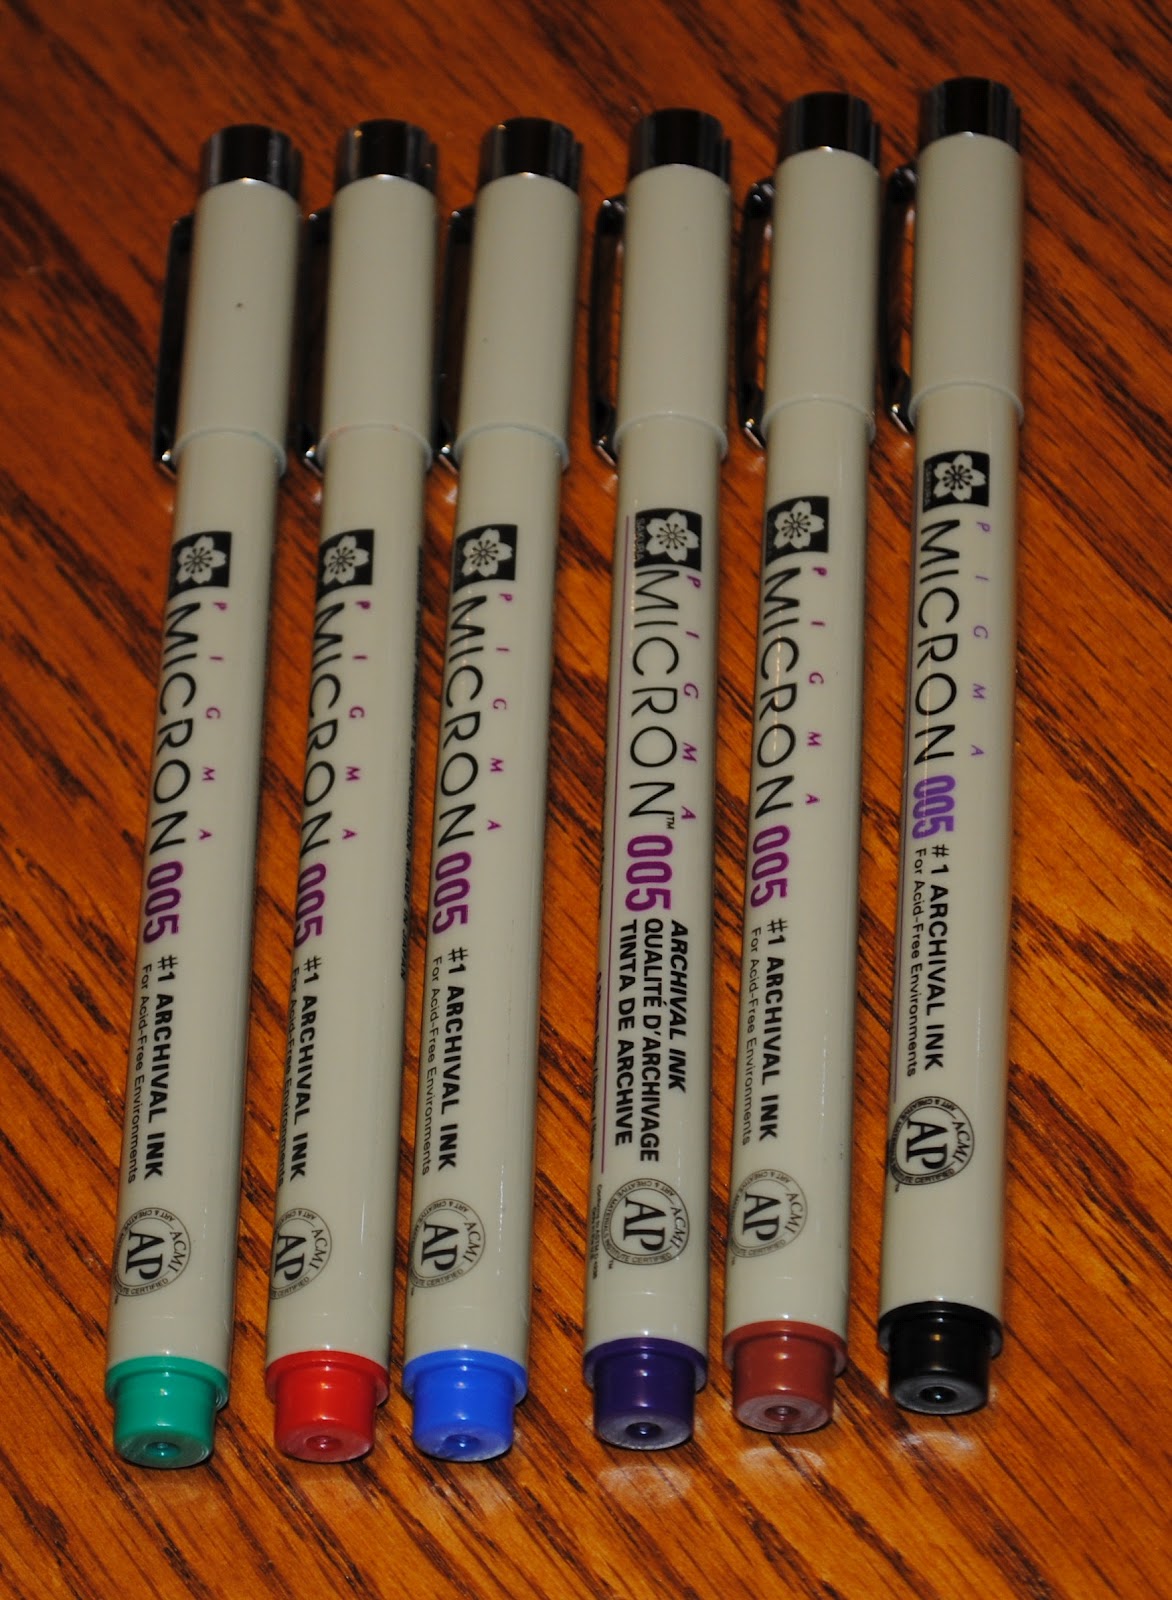 The Musings of a Christian Pilgrim: Using Pigma Micron Pens for Bible Study